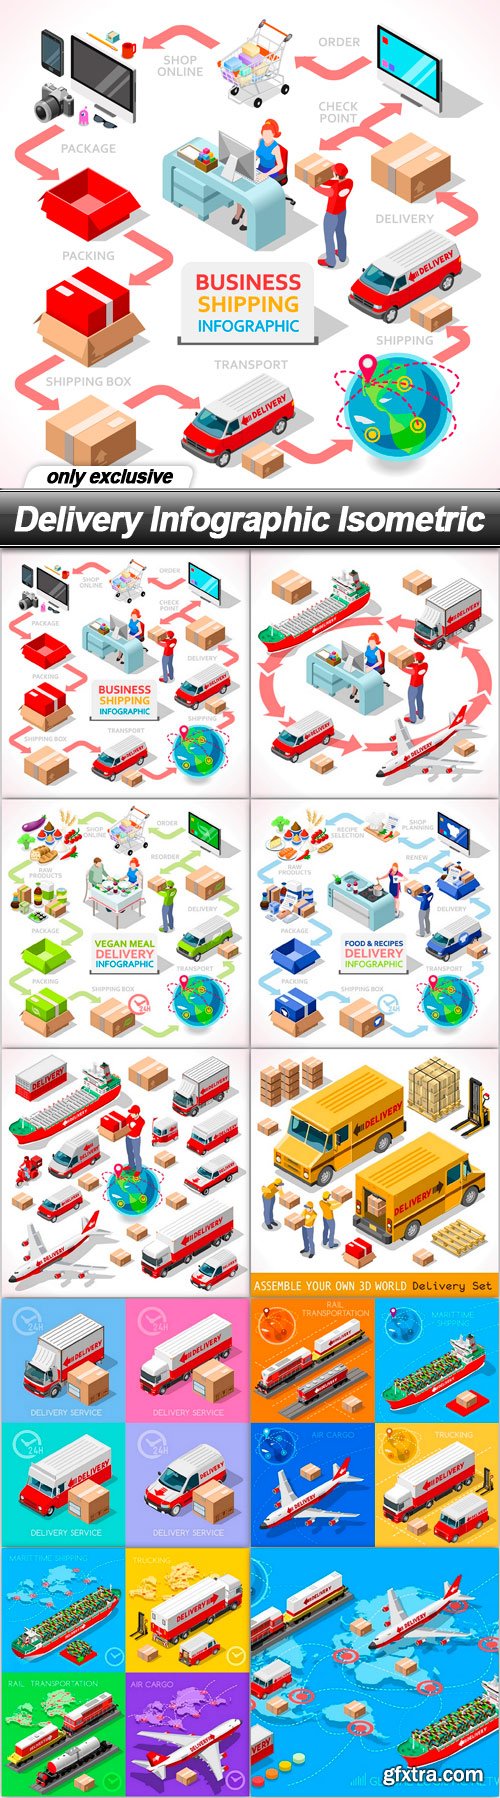 Delivery Infographic Isometric - 10 EPS